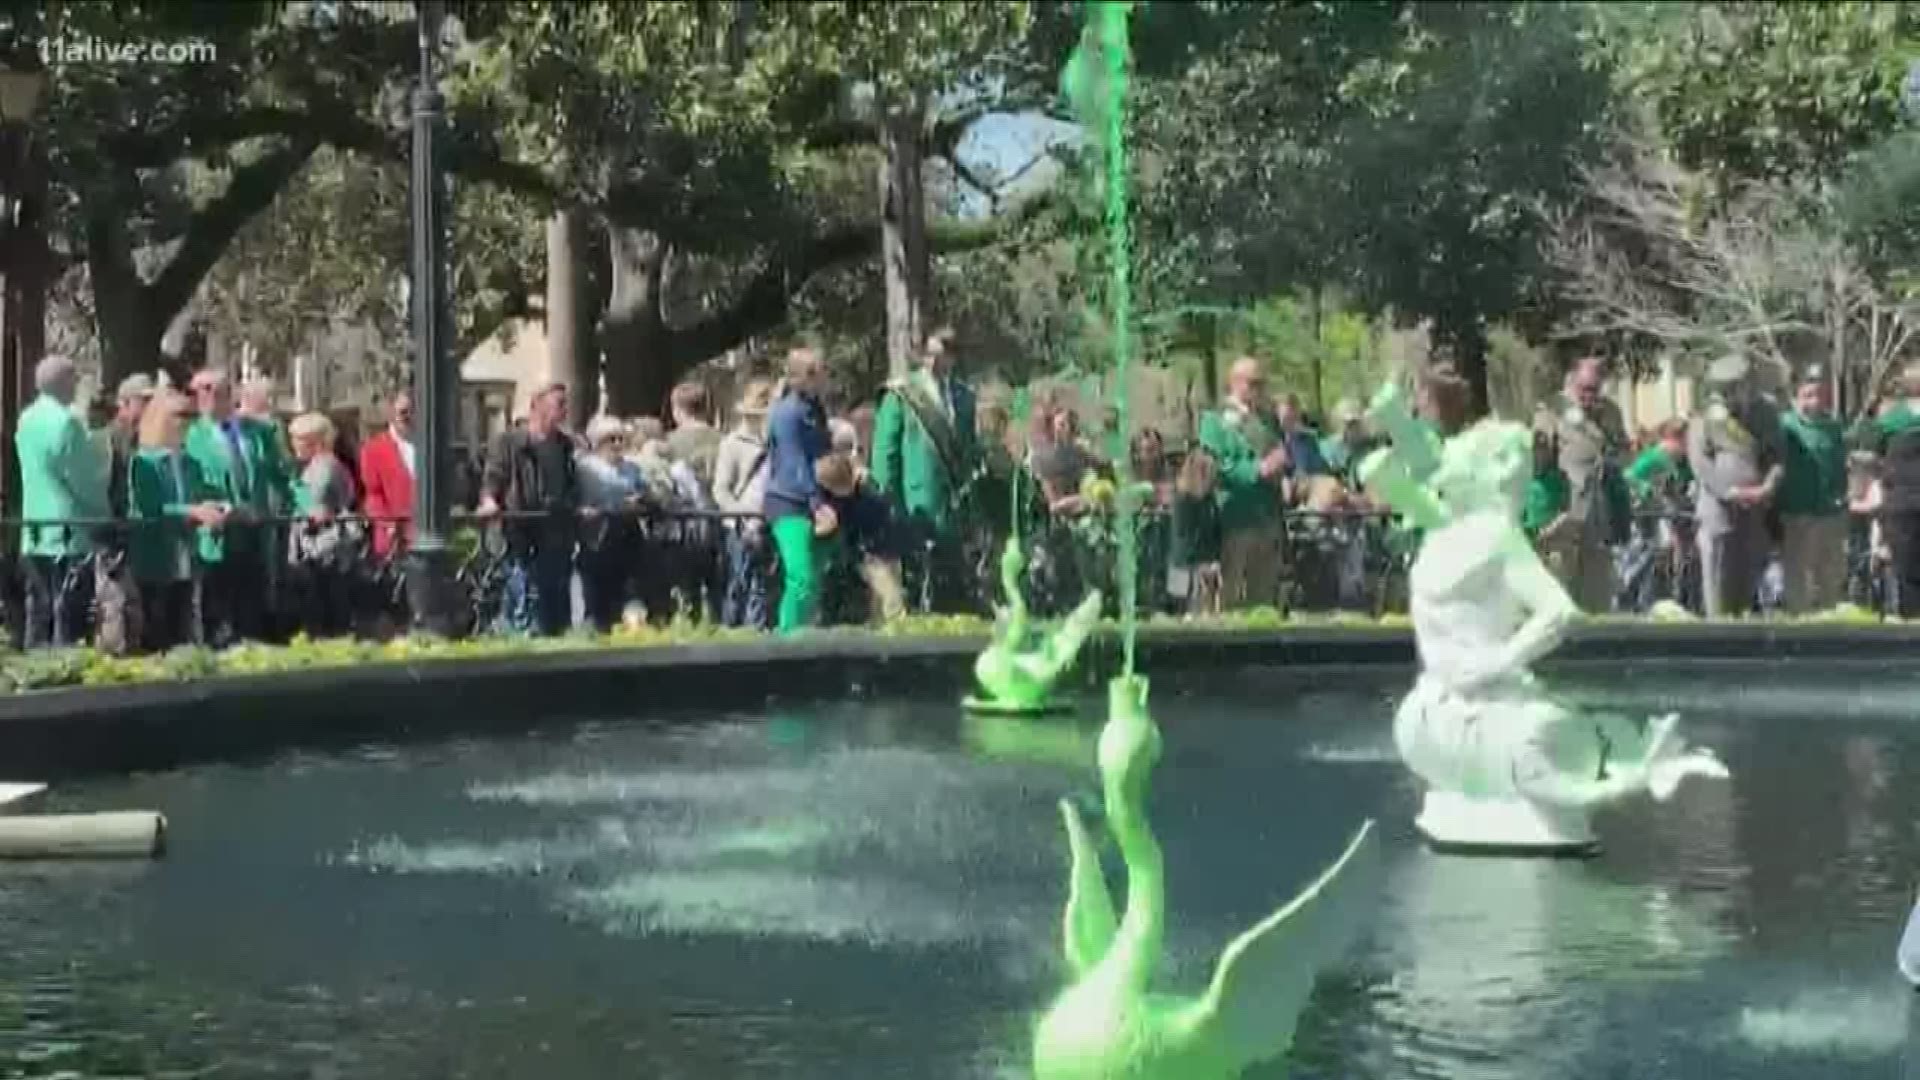 Savannah's St. Patrick's Day parade regulations will disappoint